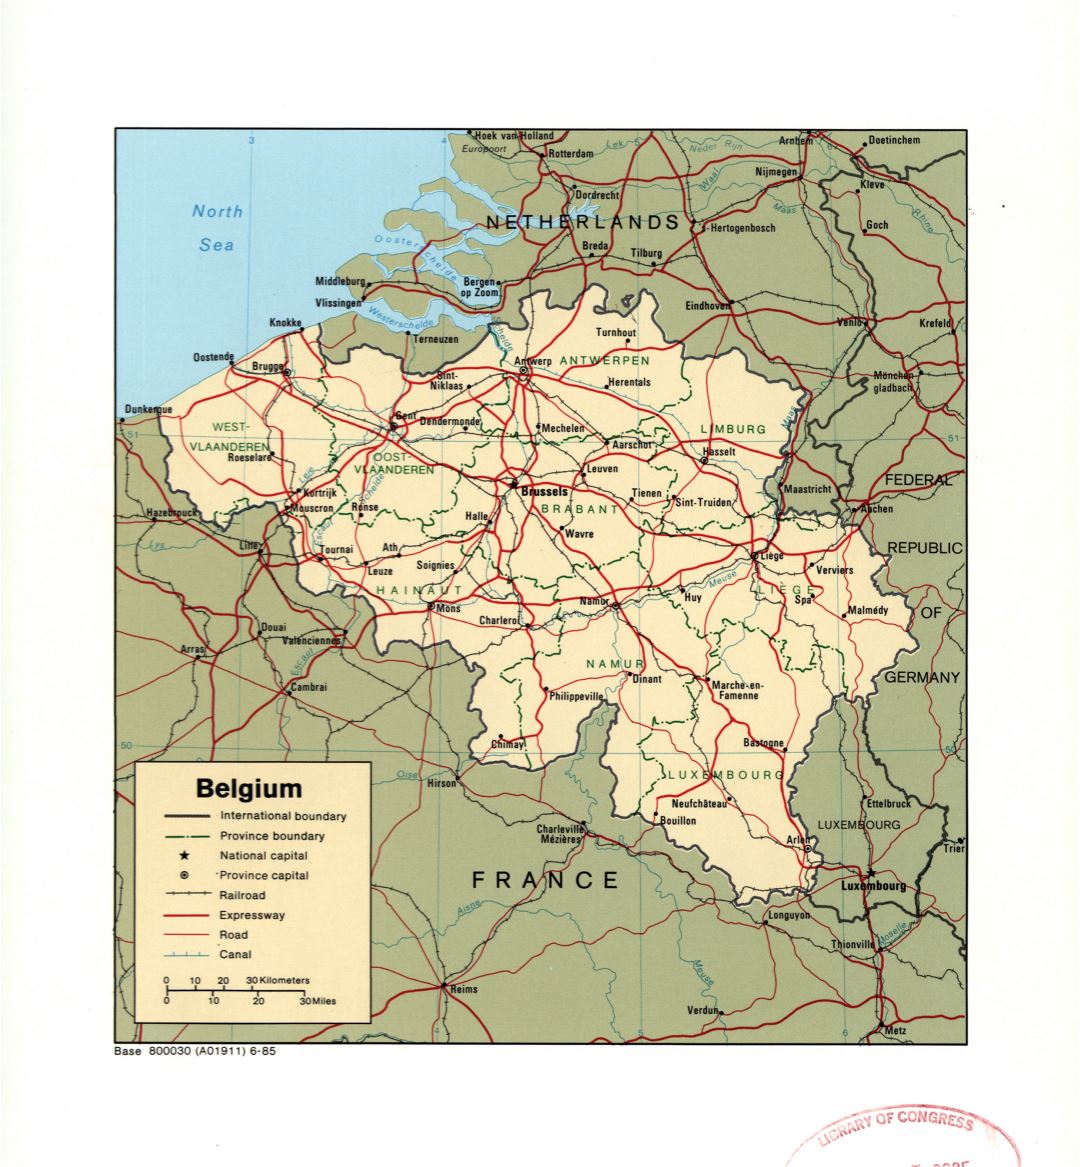 Large detail political and administrative map of Belgium with marks of large cities, roads, railroads and canals - 1985